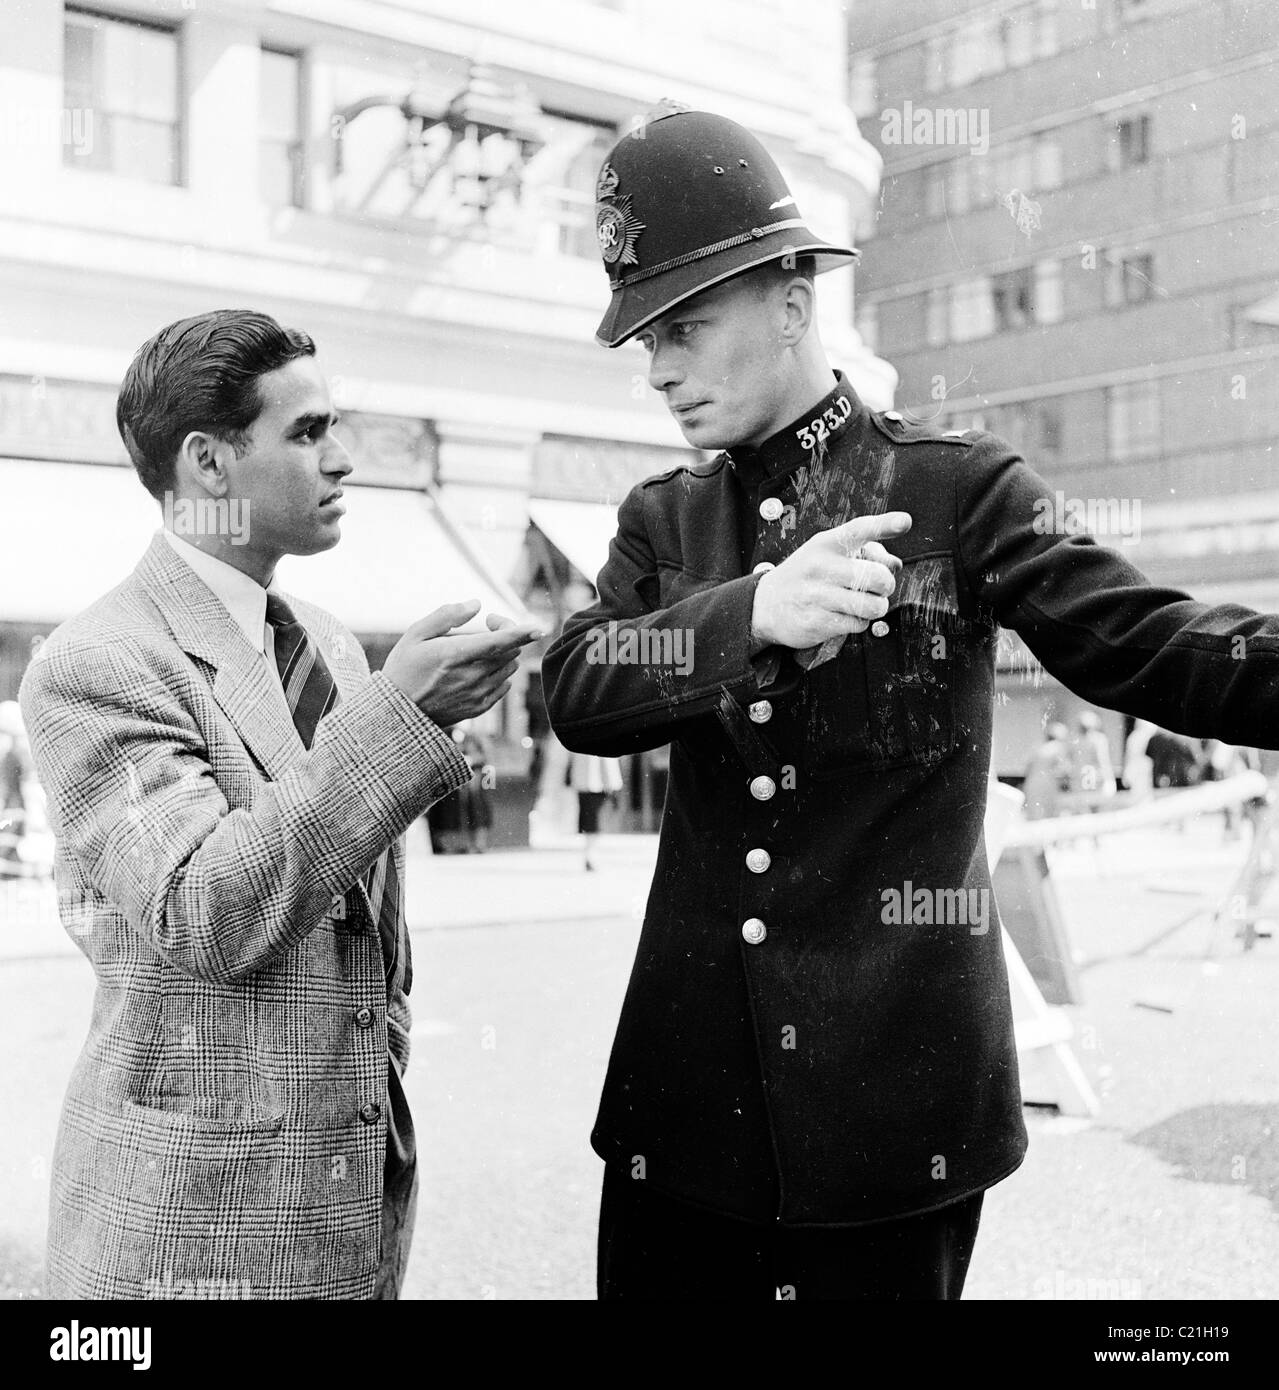 1950s, historical, London and a newly arrived immigrant to the UK receives directions from a British policeman in the uniform and helmet of the era. Stock Photo